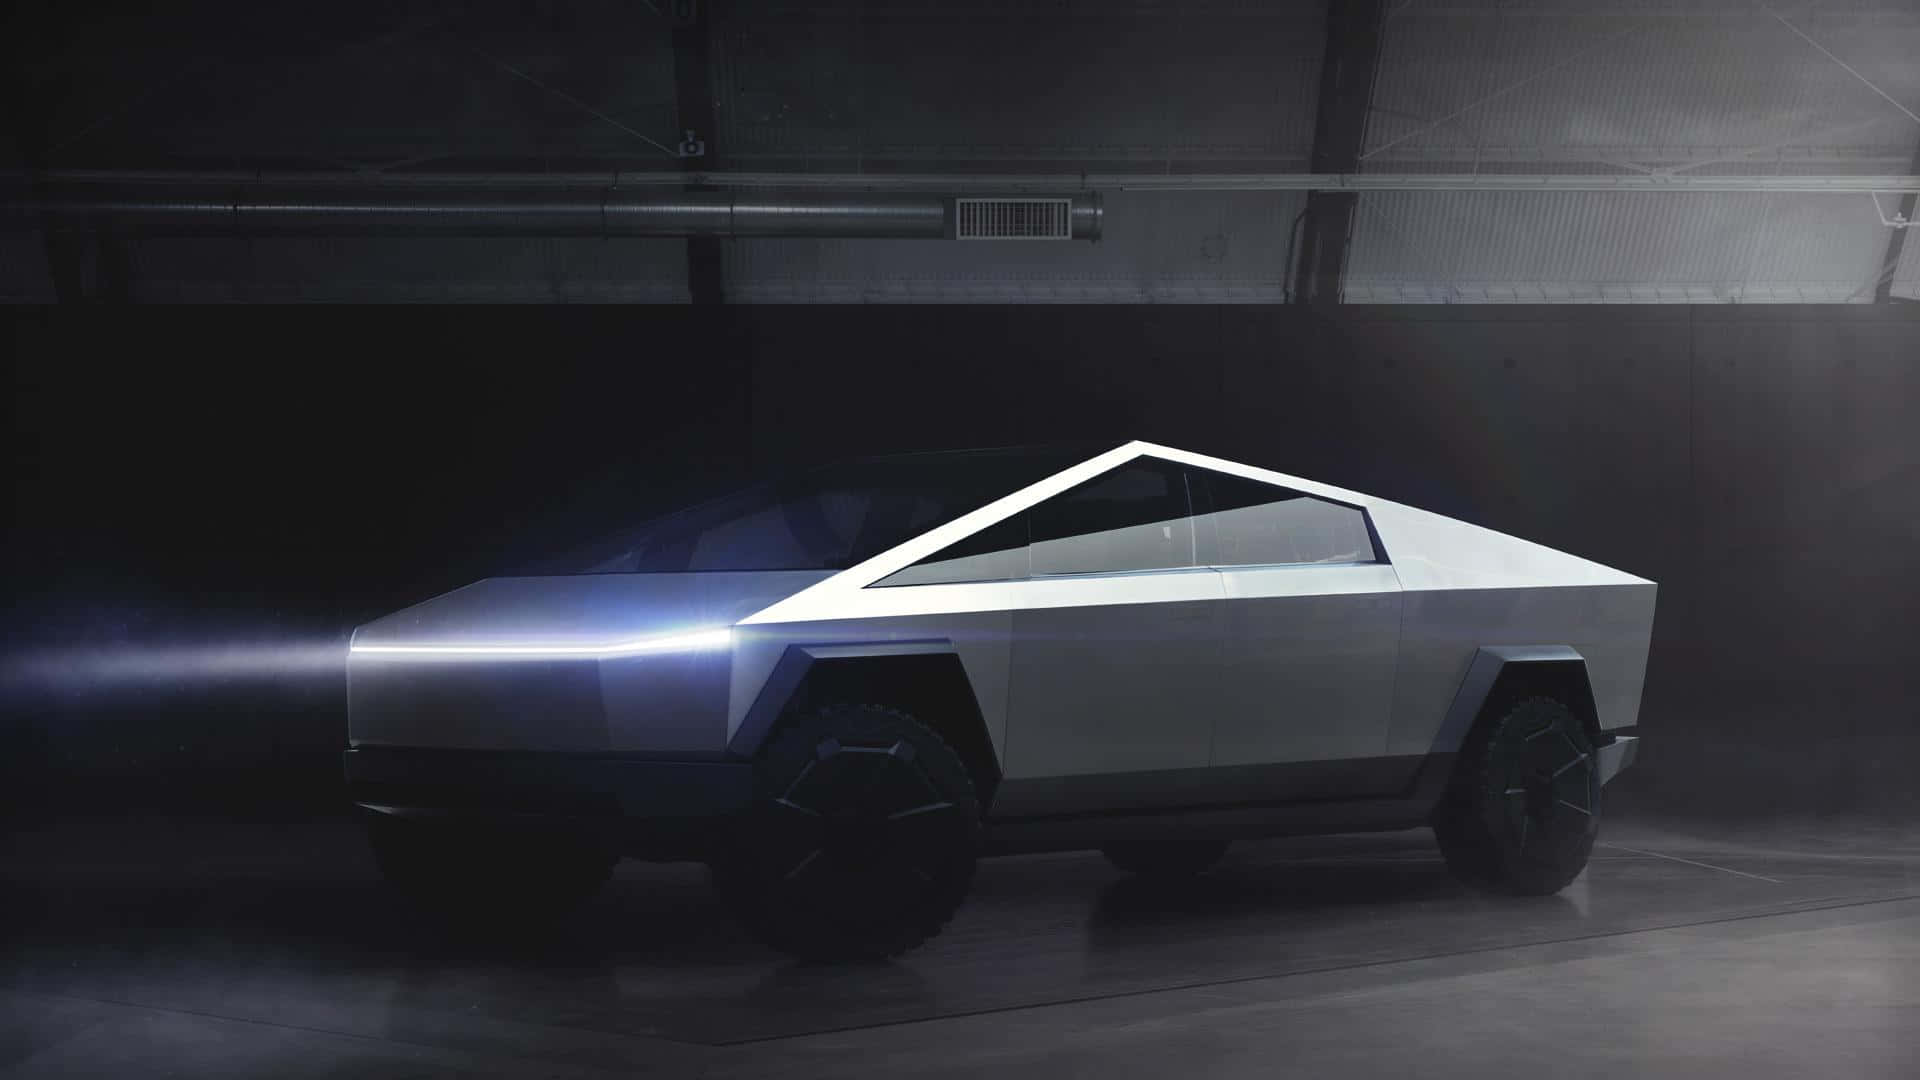 A Futuristic Vehicle Is Shown In A Dark Room